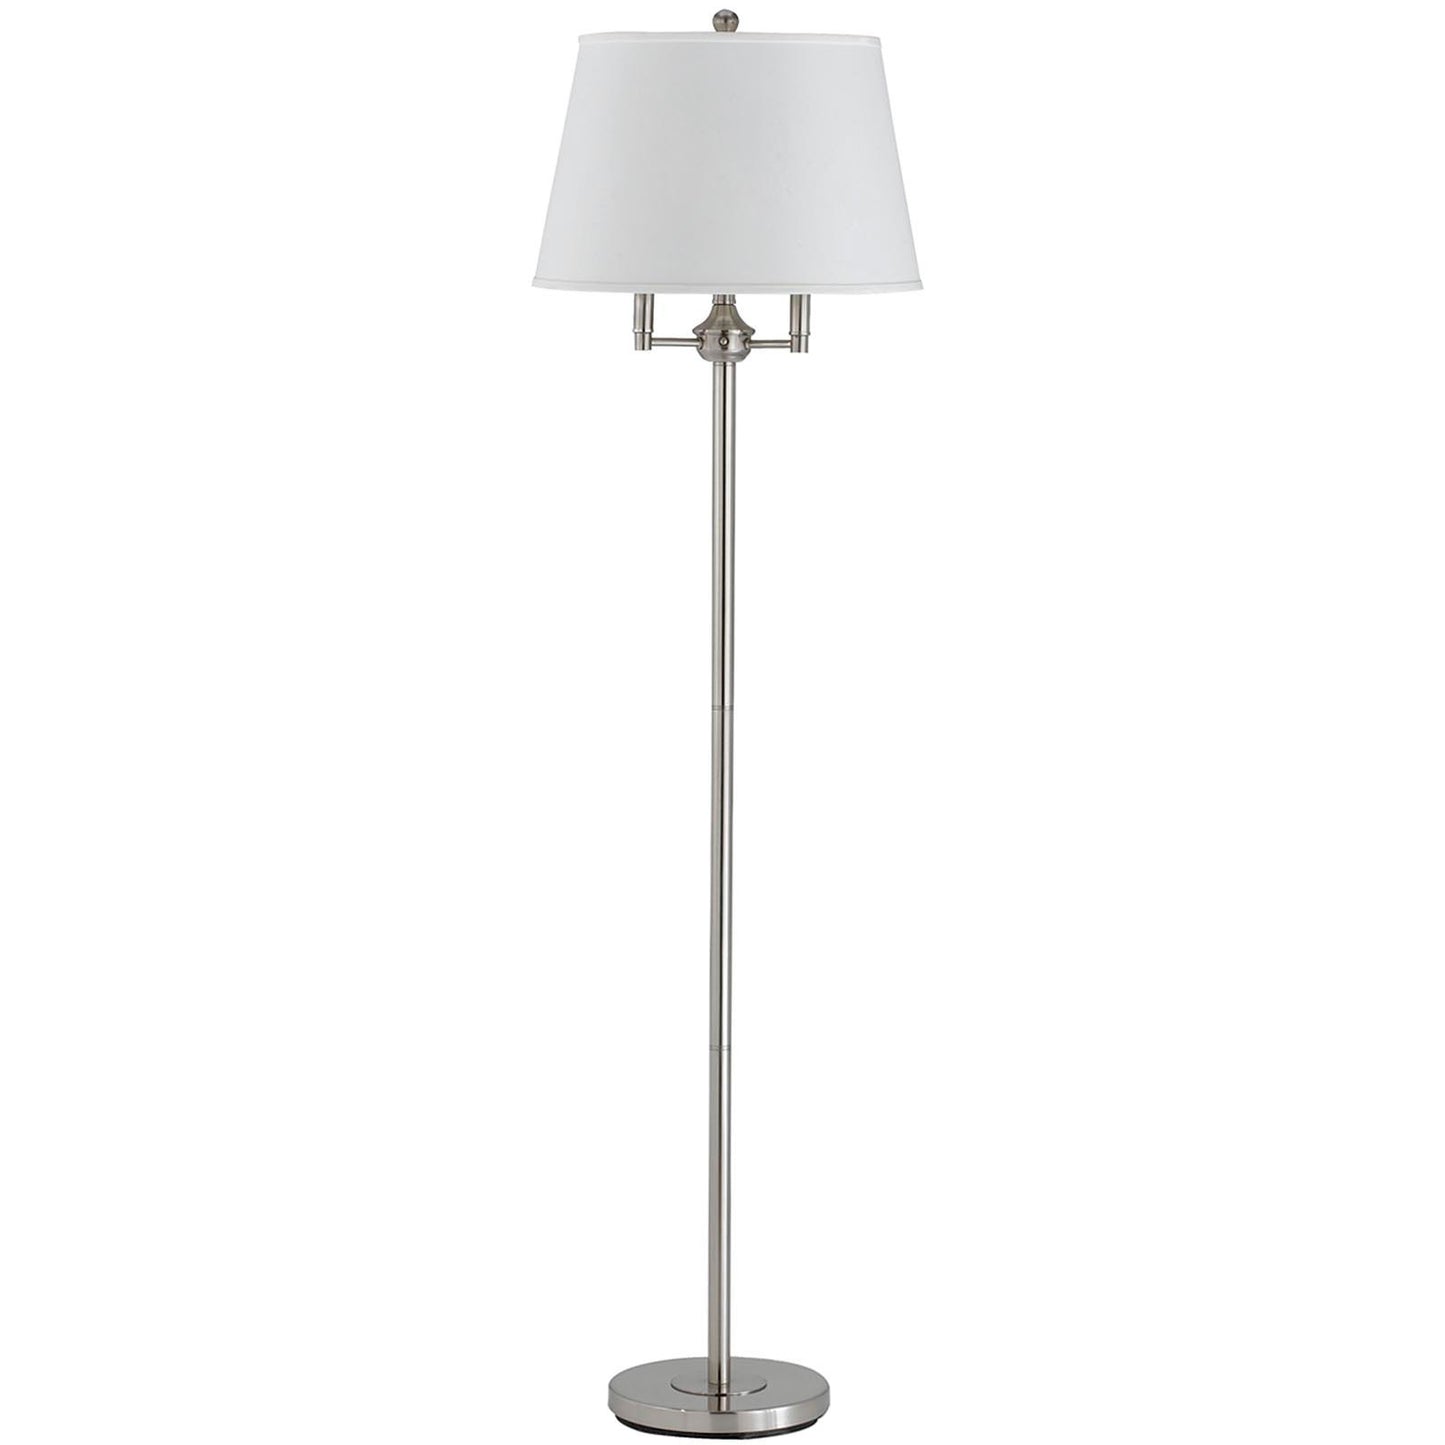 62" Nickel Four Light Traditional Shaped Floor Lamp With White Square Shade